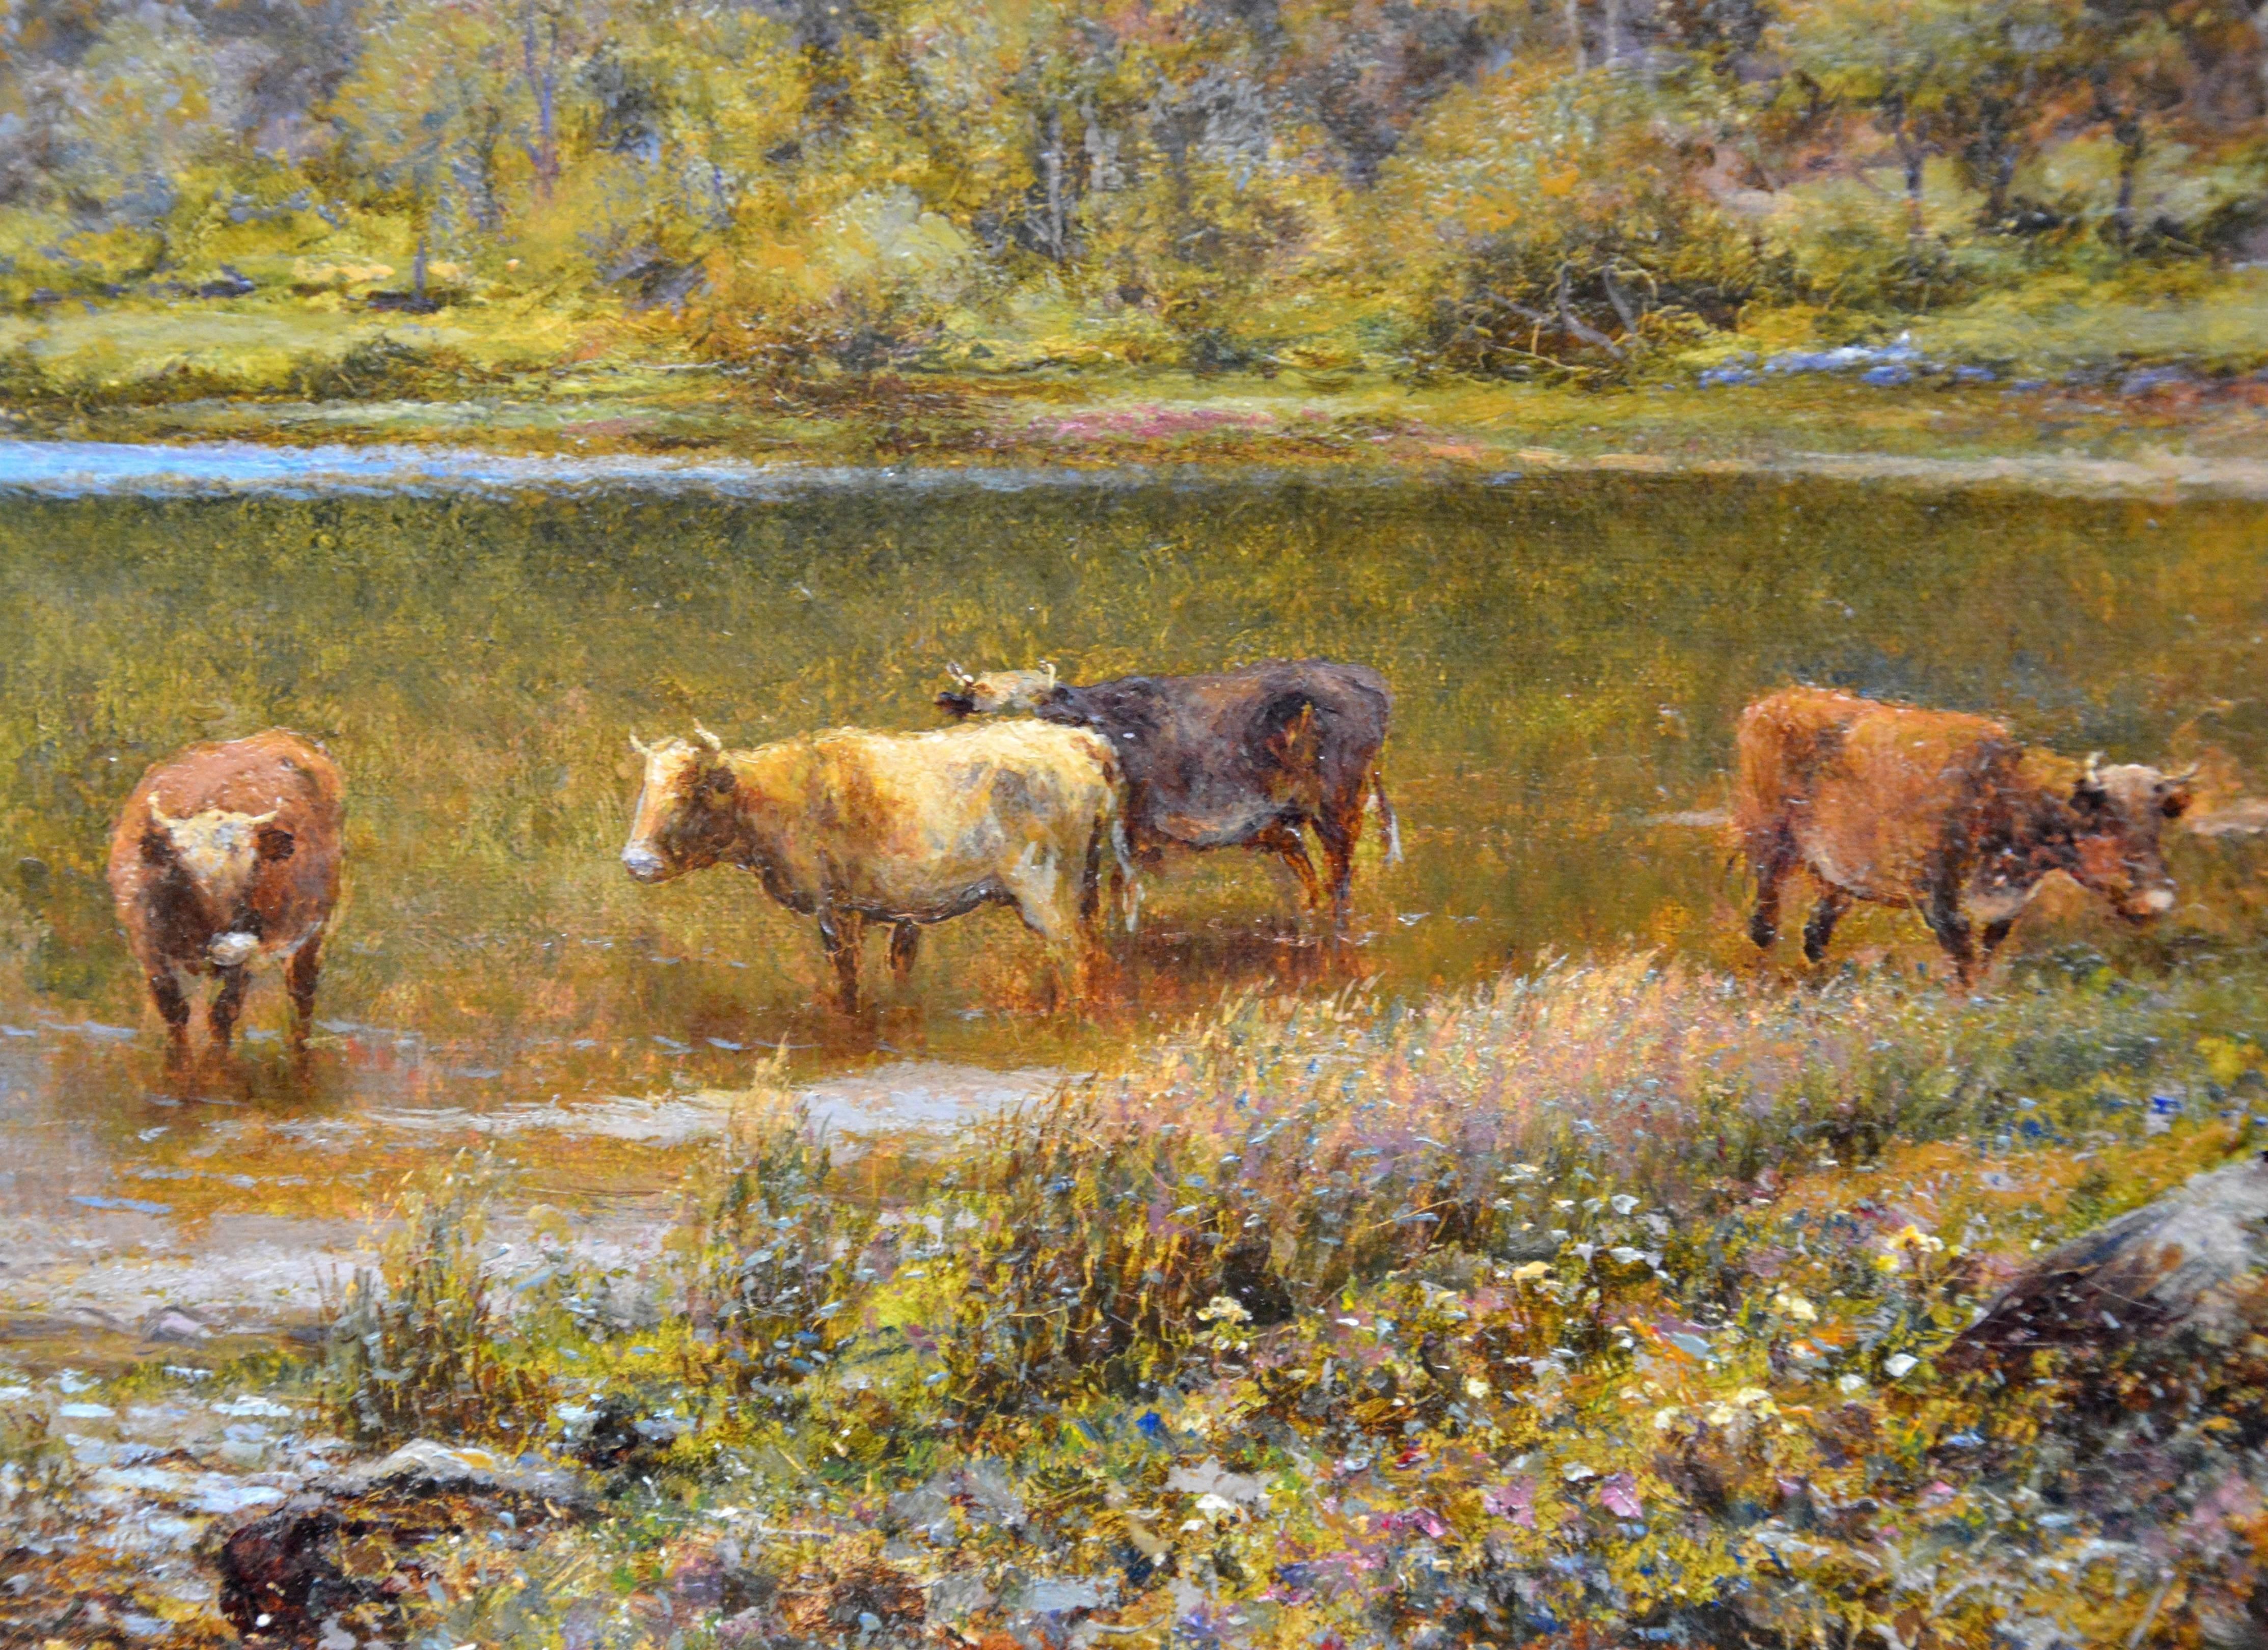 Scottish Landscape with Highland Cattle - 19th Century Oil Painting - Glendening 4